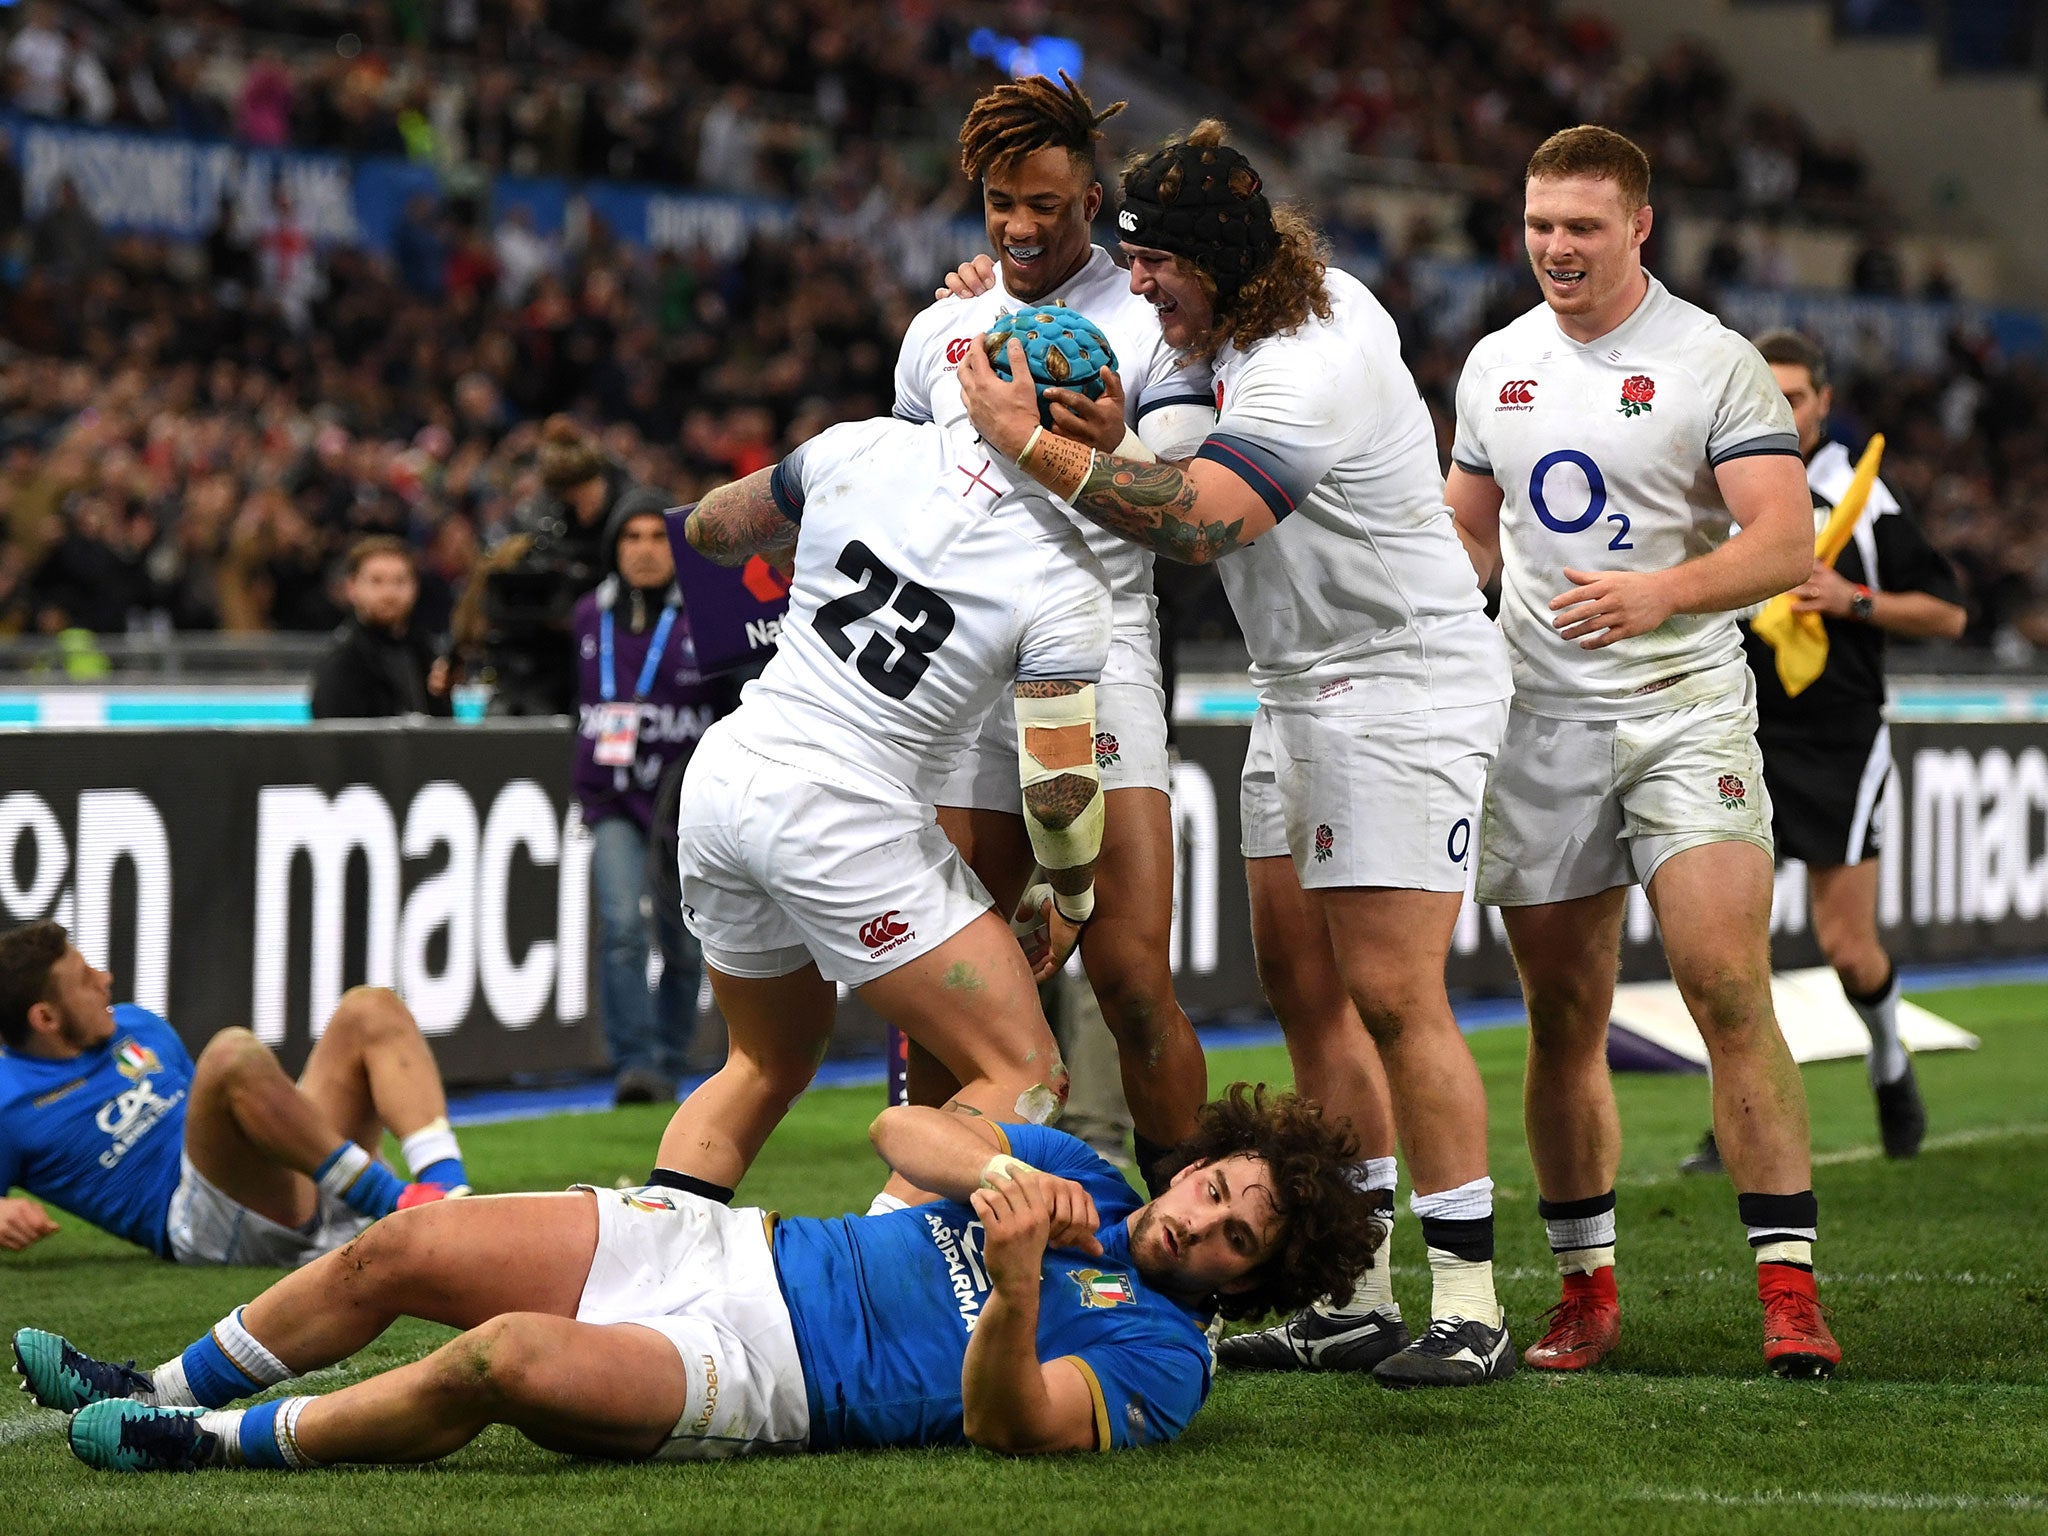 England posted a total of seven tries against their opponents